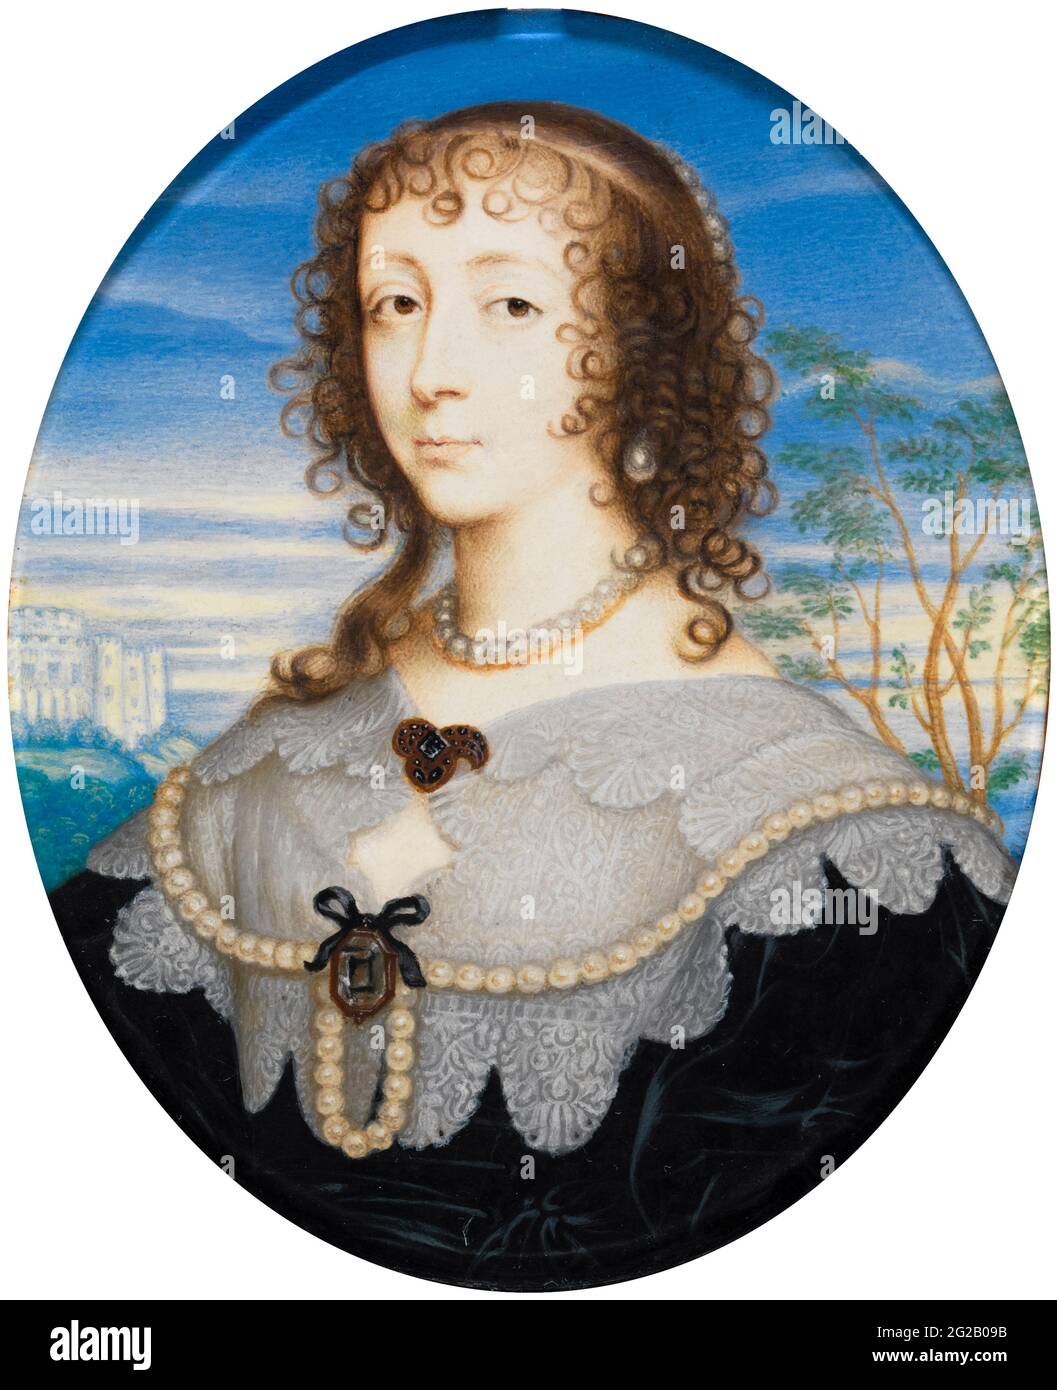 Queen Henrietta Maria (1609-1669), Queen consort and wife of Charles I of England, Scotland, and Ireland, portrait miniature by David Des Granges after Sir Anthony Van Dyck, painting after 1636 Stock Photo